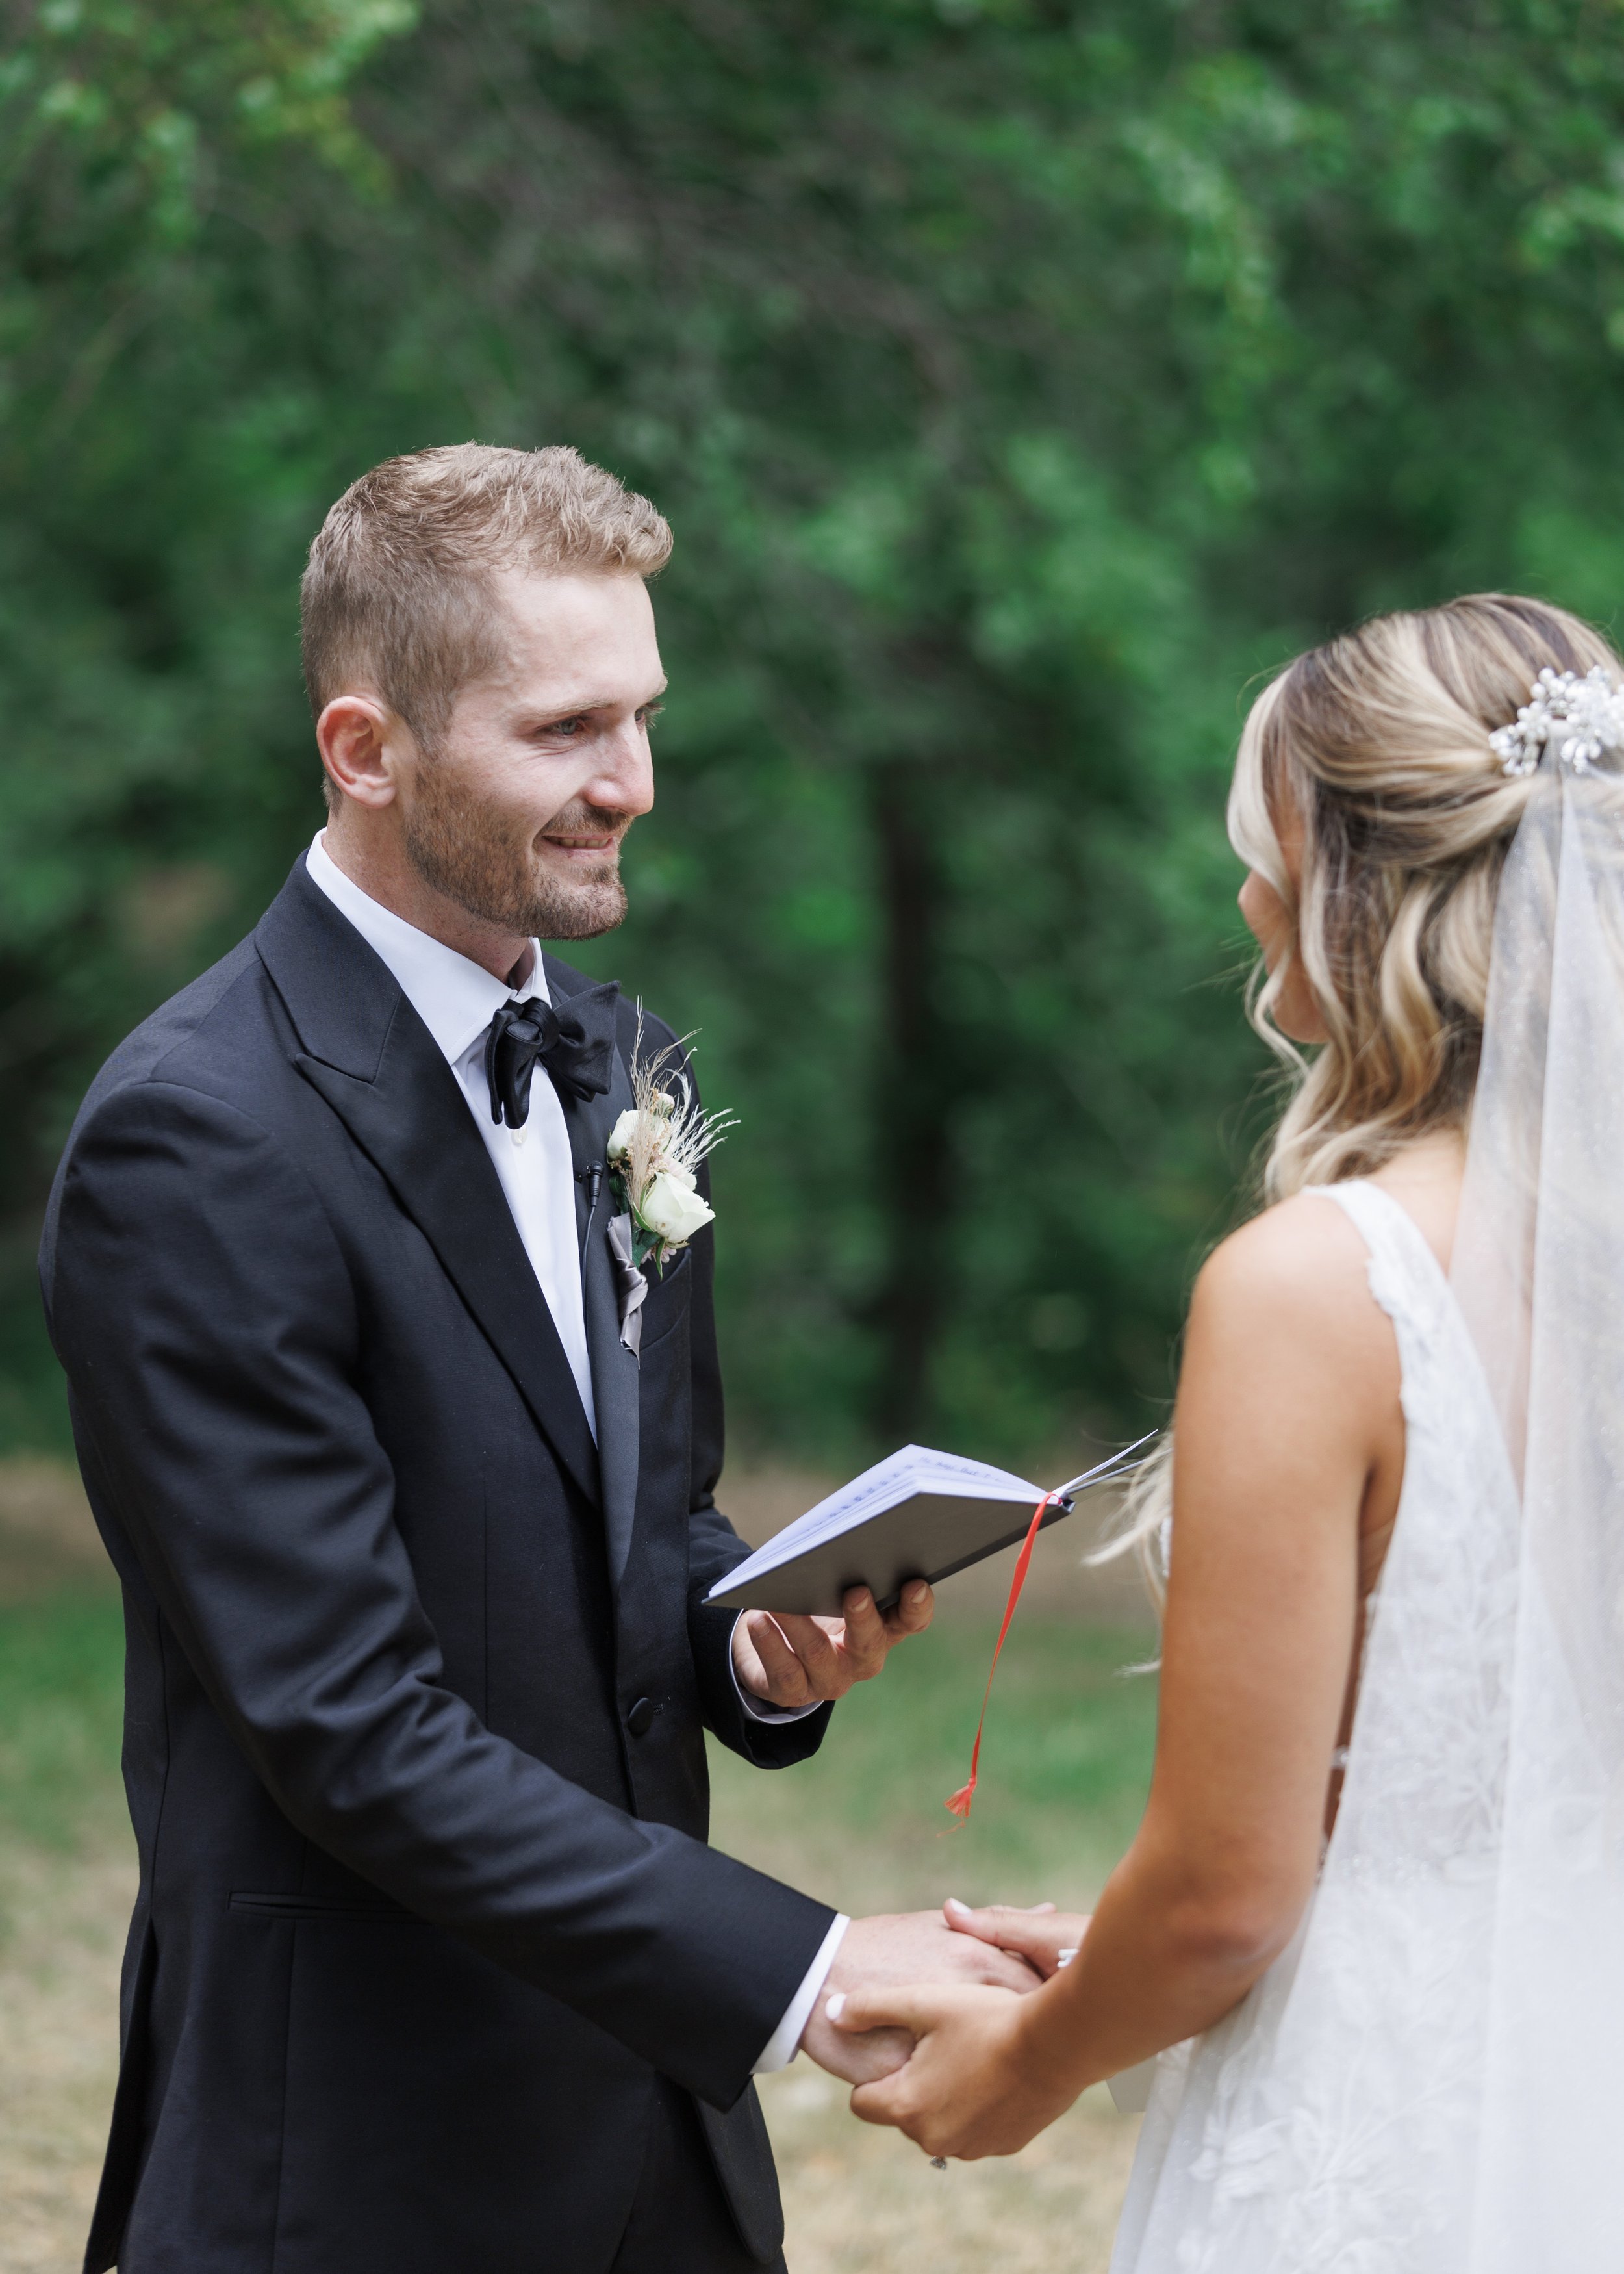  A groom in a black suit and bowtie holds the bride’s hands while reading his vows by Savanna Richardson Photography. groom vows Mapleton #SavannaRichardsonPhotography #SavannaRichardsonWeddings #QuietMeadowFarms #MapletonUTweddingphotographers 